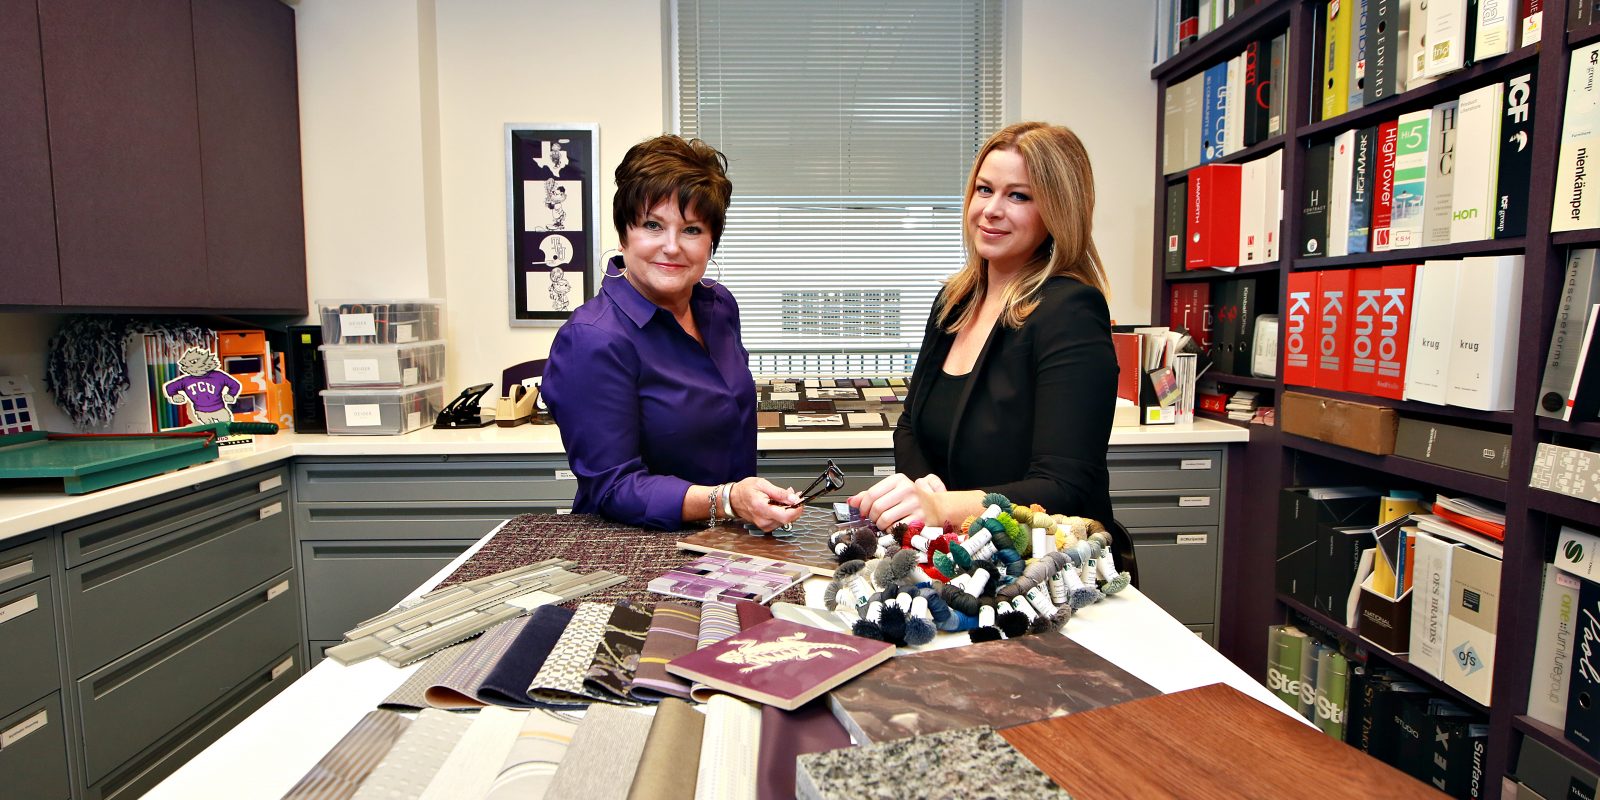 TCU interior designers Lisa Aven, left, and Stephanie McPeak, right, pose in their office in the Physical Plant building. Photo by Carolyn Cruz